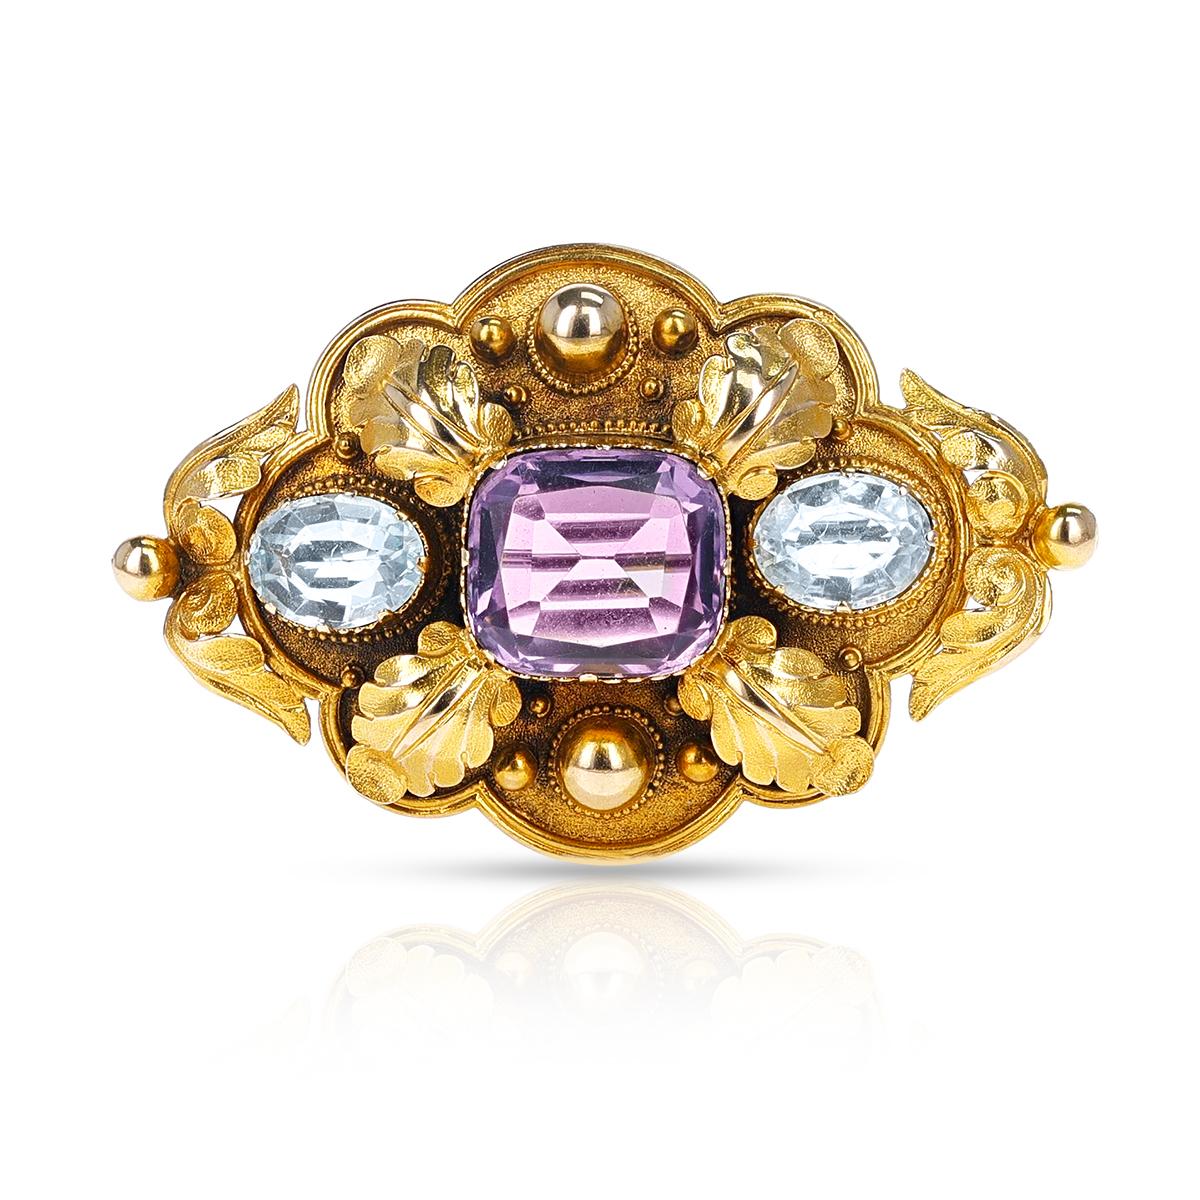 A Victorian Cushion Amethyst and two Oval Topaz stones Brooch made in 18k Gold. There is no gold mark but it has been tested. The weight of the brooch is 11.10 grams. The dimensions are 2 inches x 1.25 inches. 

Amethyst Dimensions: 13.66 x 12.18 x